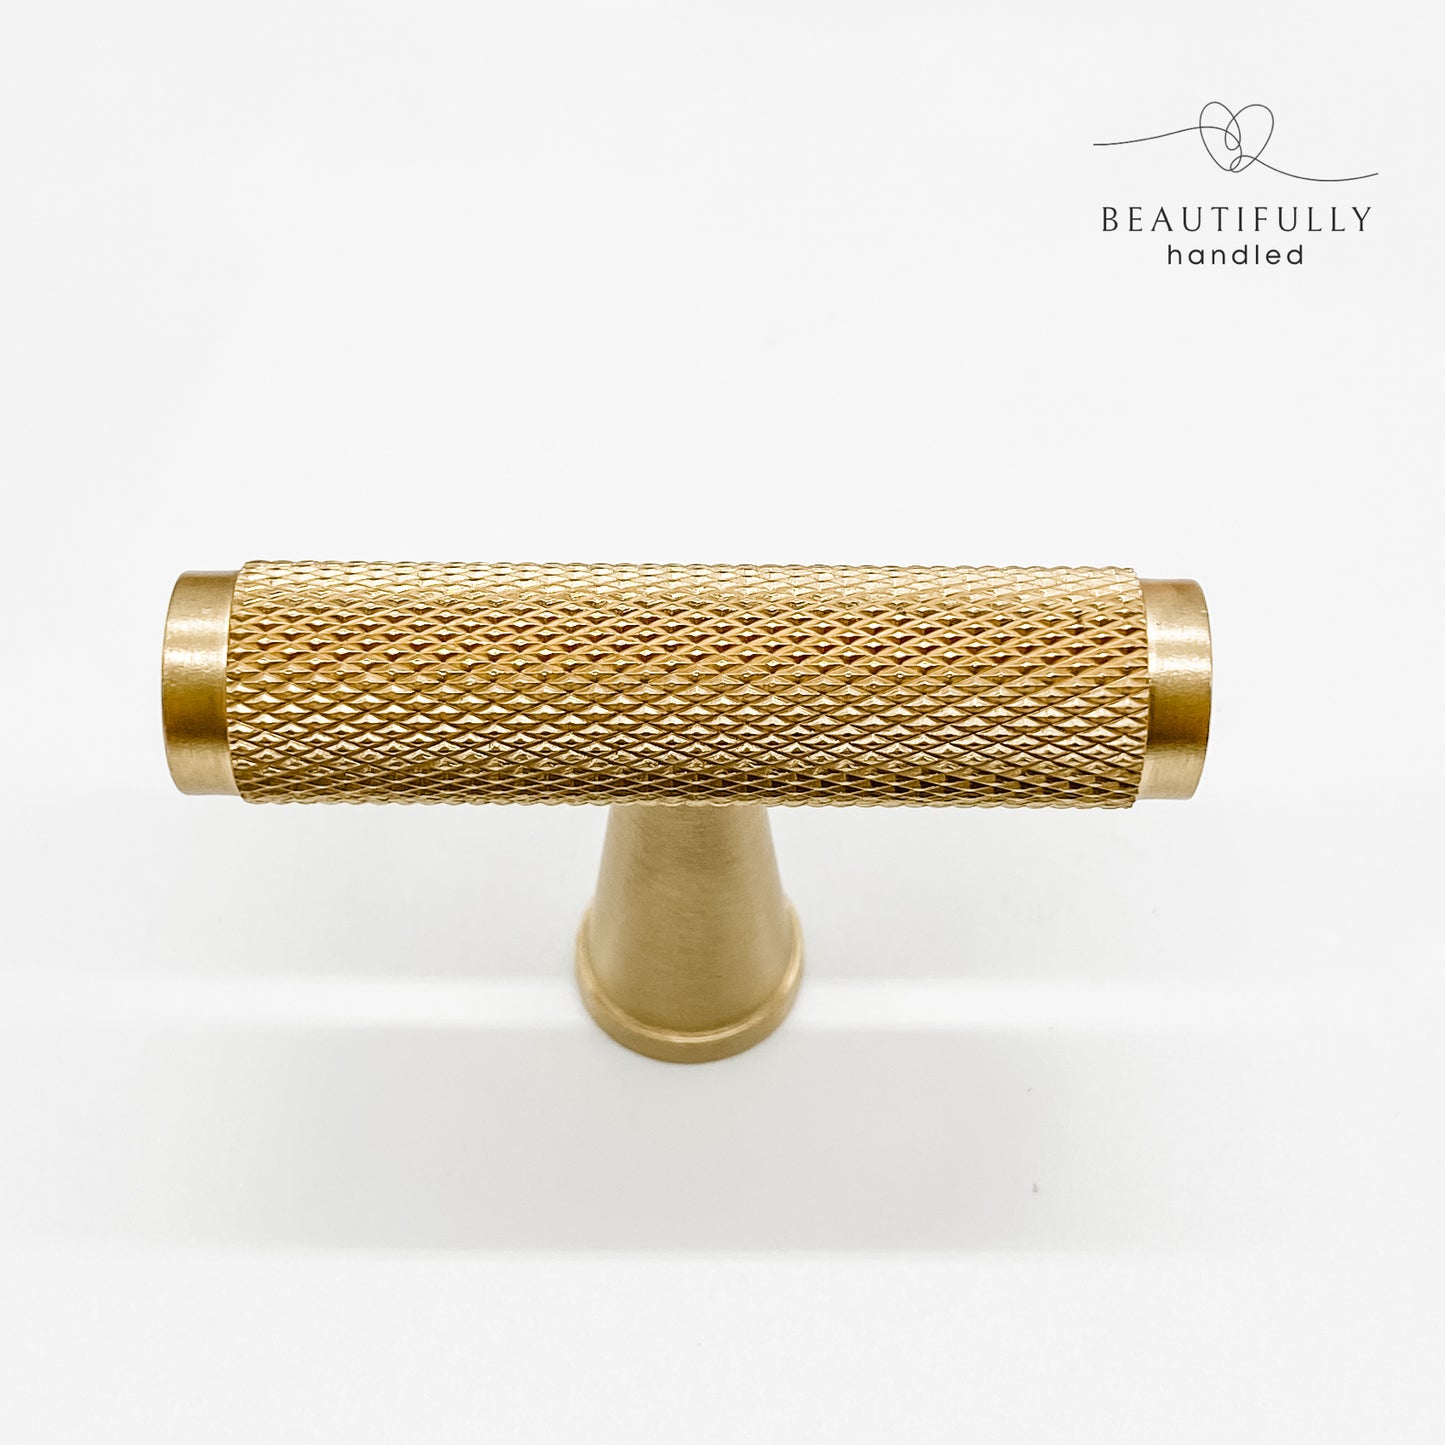 solid brass knurled t bar drawer handle showing all detail of knurling on white background